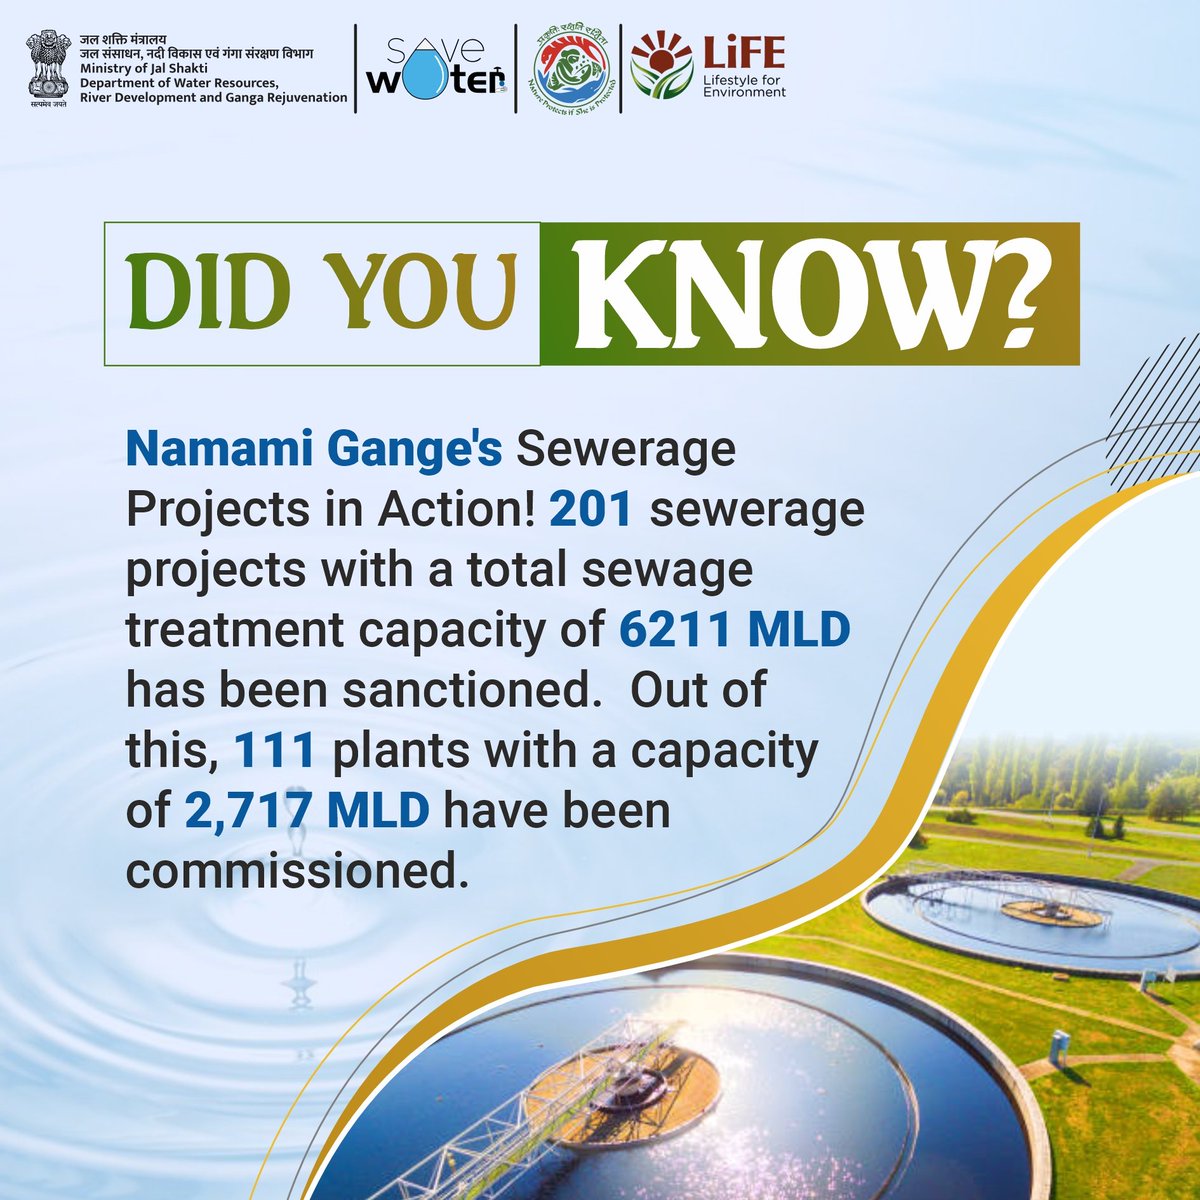 Sewage treatment plants are the #Ganga's unsung heroes! Imagine tiny guardians tirelessly filtering out pollutants from wastewater before it enters the river. These plants mean cleaner water, healthier fish populations, & thriving ecosystem for Ganga. #NamamiGange #DidYouKnow